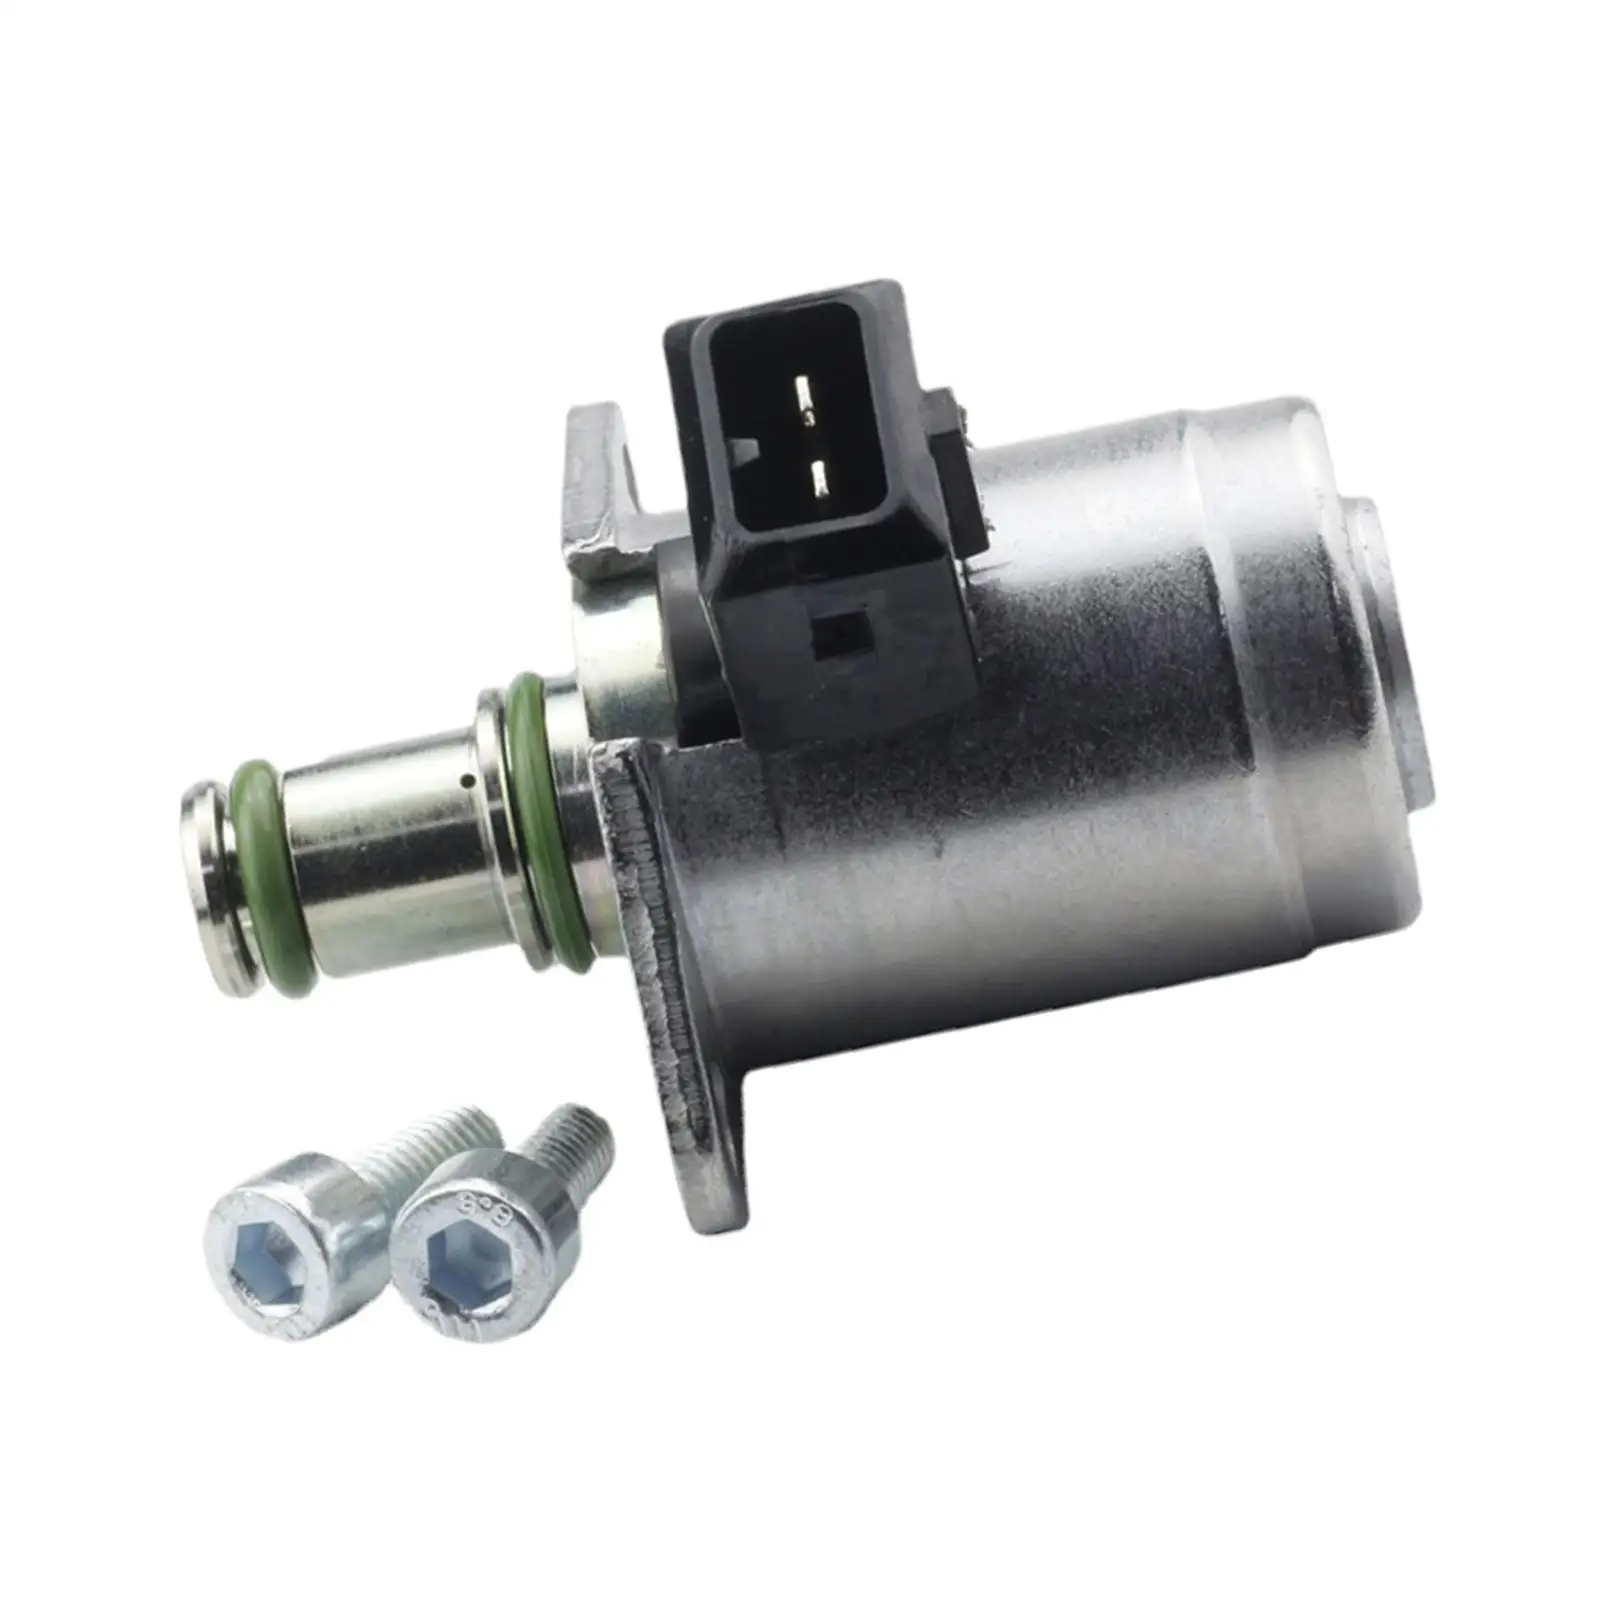 A2114600984 Durable High Performance Premium Car Accessories Power Steering Proportioning Valve for Mercedes-benz C-klass